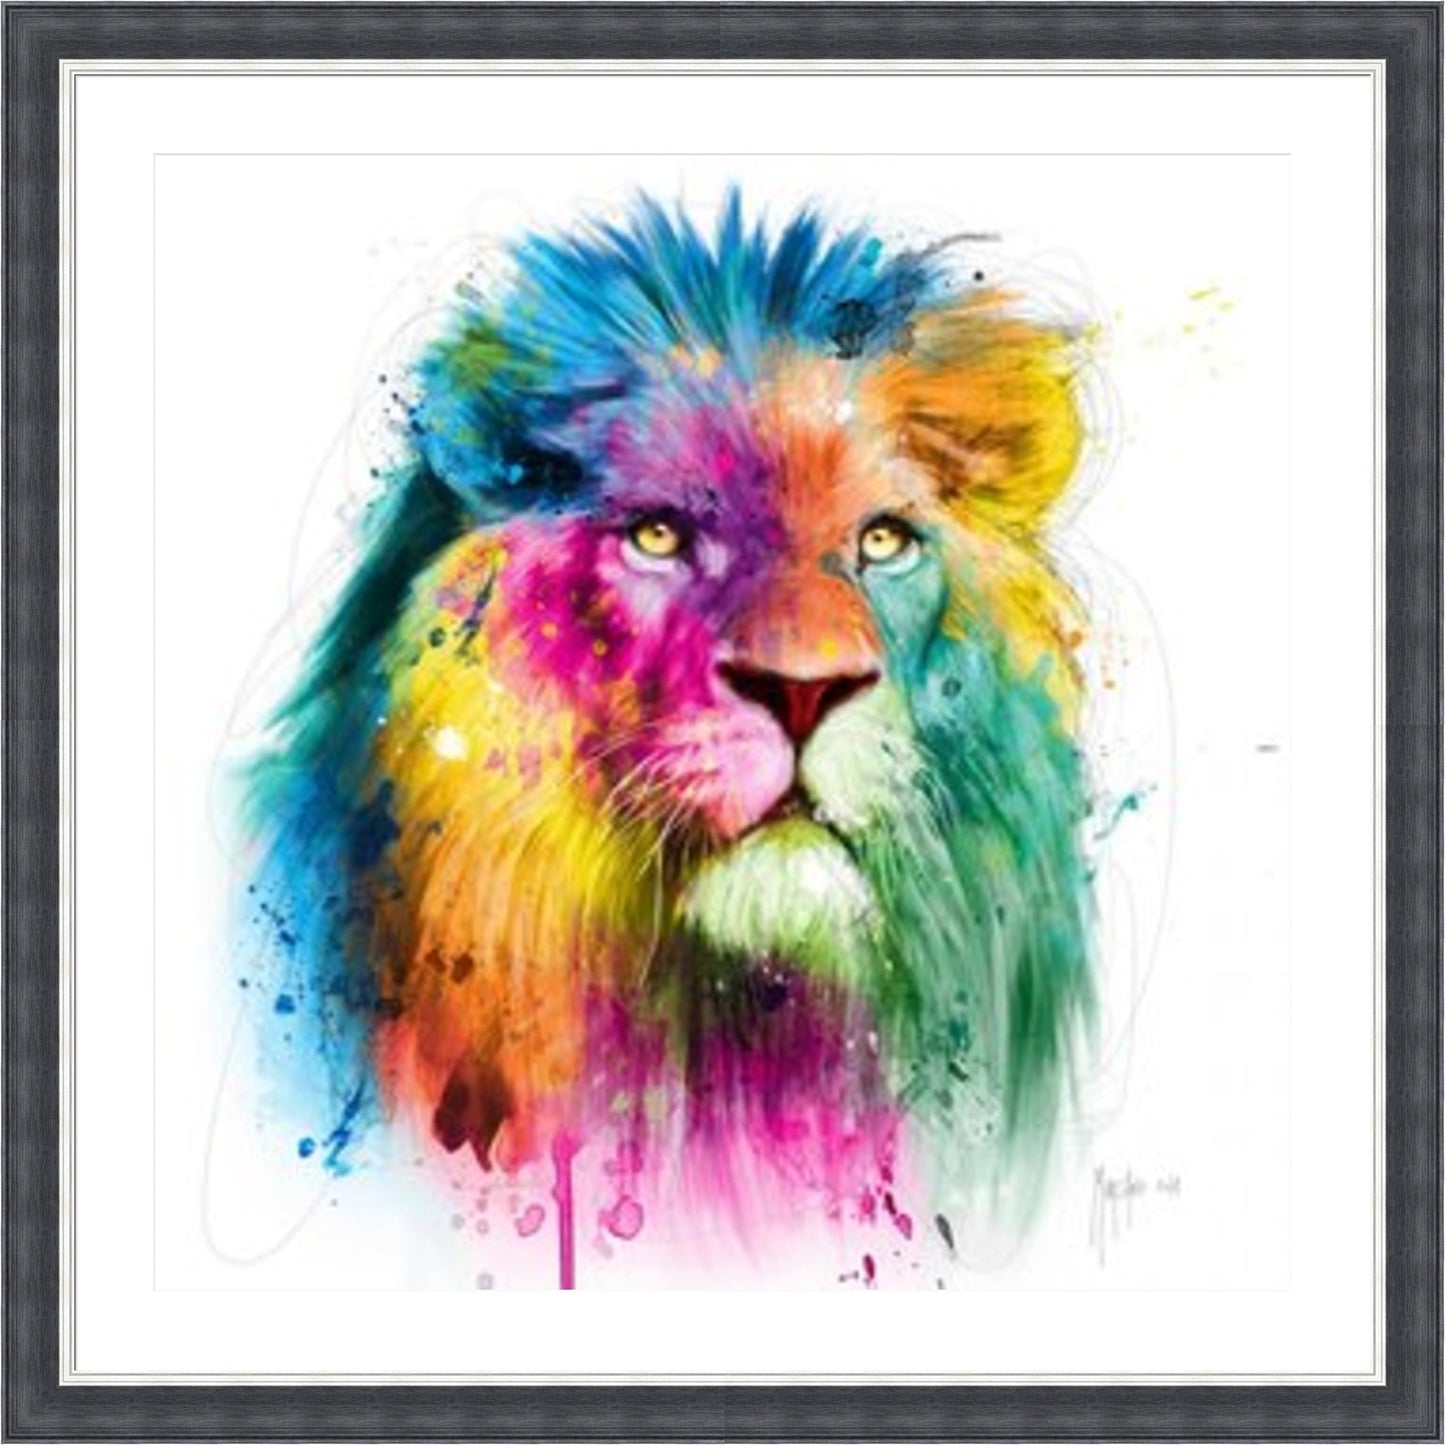 Lion by Patrice Murciano